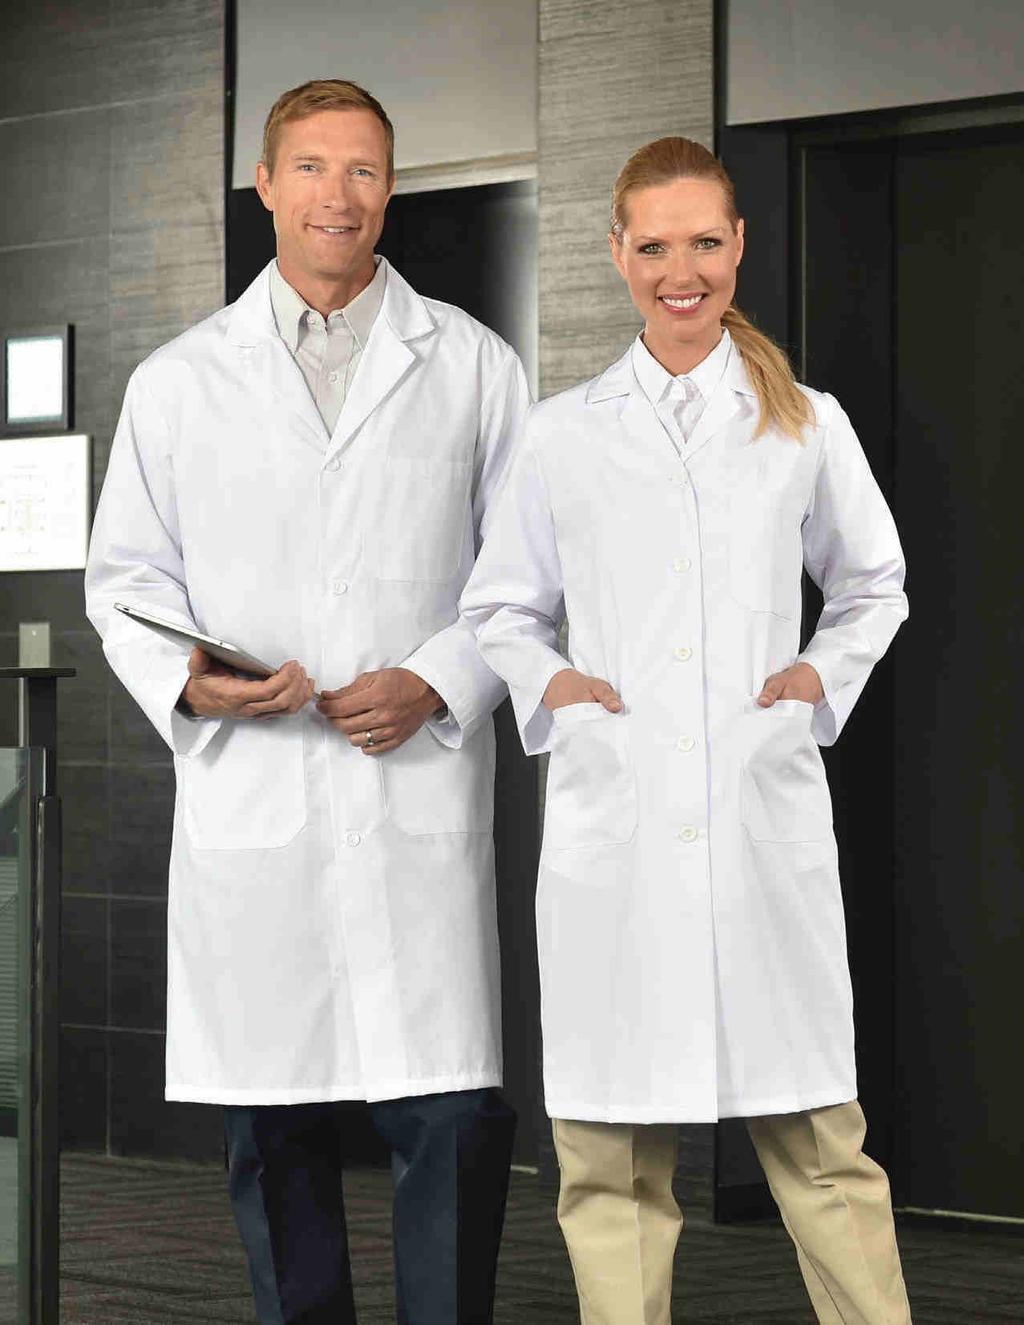 LAB COATS 6100 / 6102 6185 Men s lab Coats 100% Cotton Sizes range from XS-5XL. 8 oz. Cotton Twill. 6102 Button Closure with Three-Outside Pockets Available in White only.